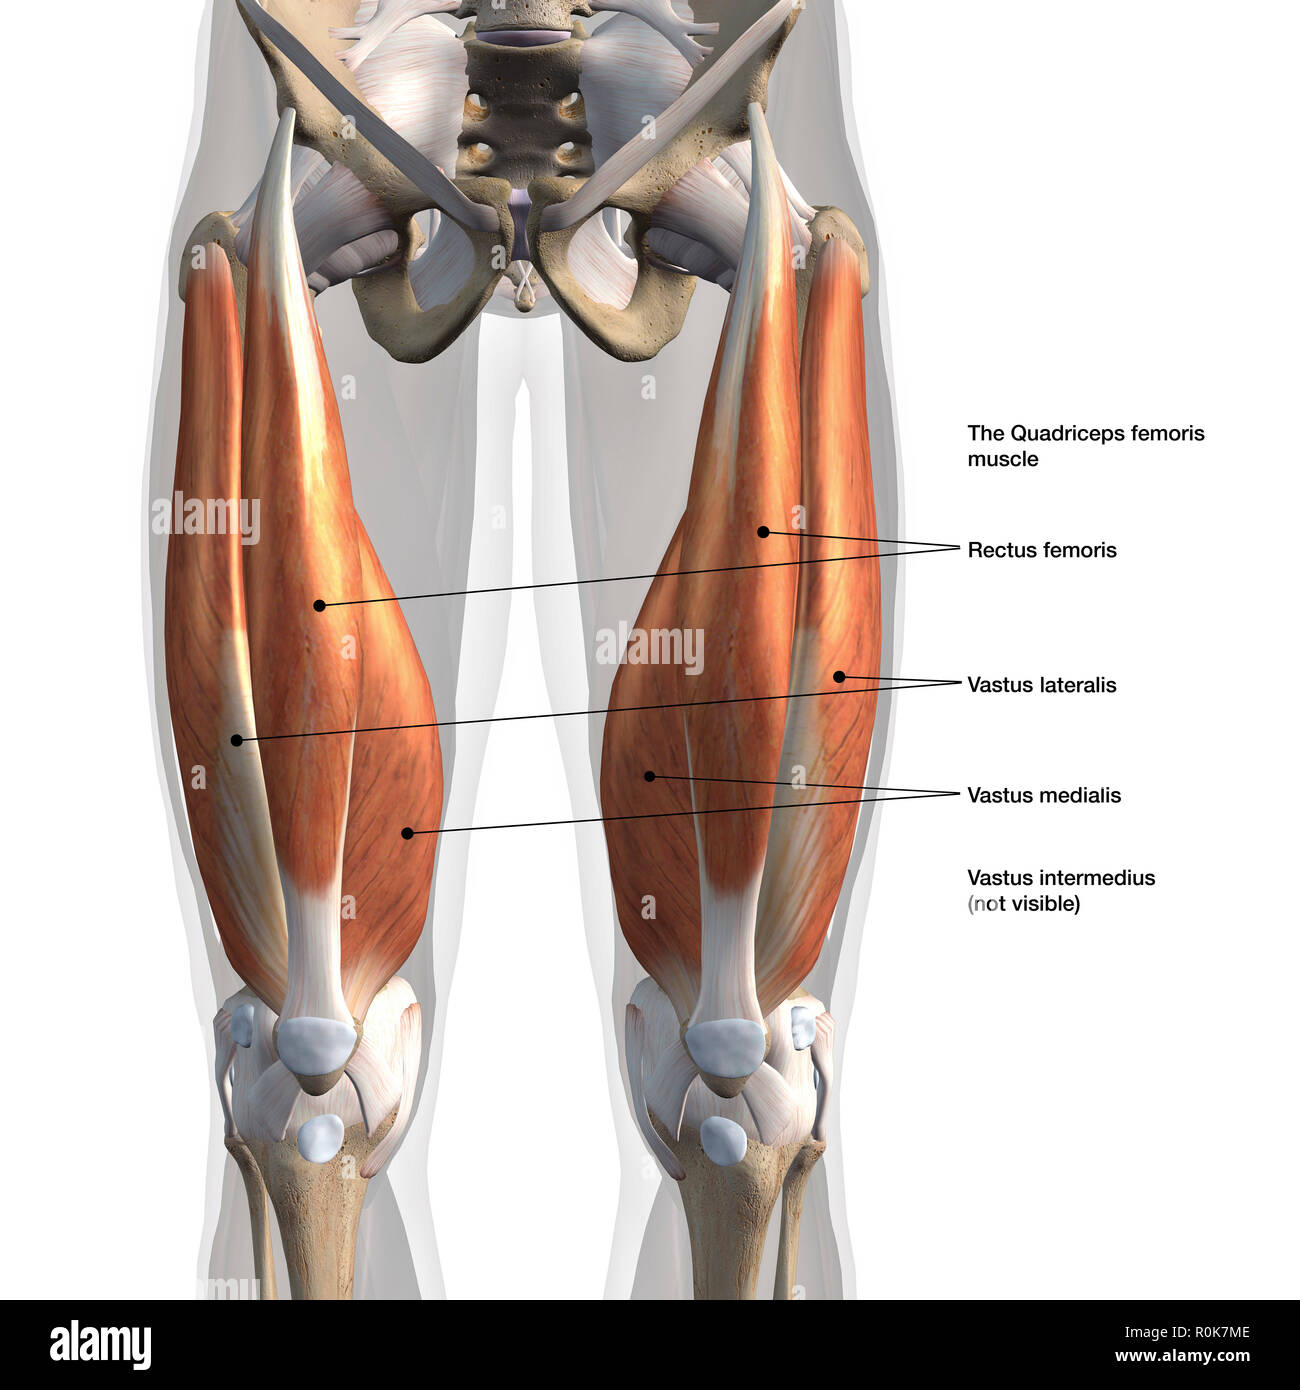 Anterior view of male quadriceps muscles with labels. Stock Photo